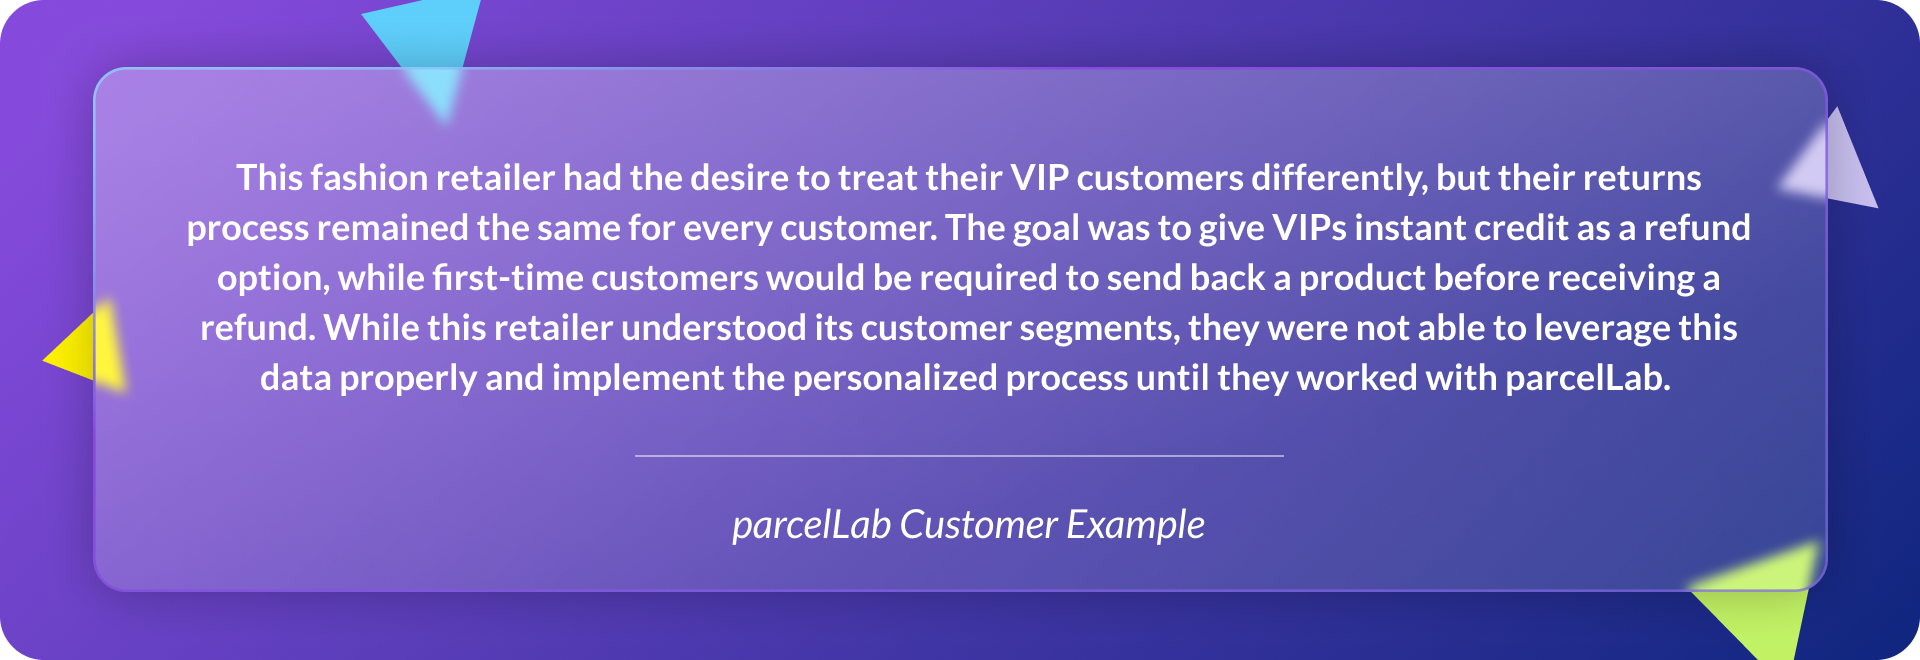 parcelLab customer example explaining how this retailer wanted to treat VIP customers differently by allowing them to receive instant refunds on returns.